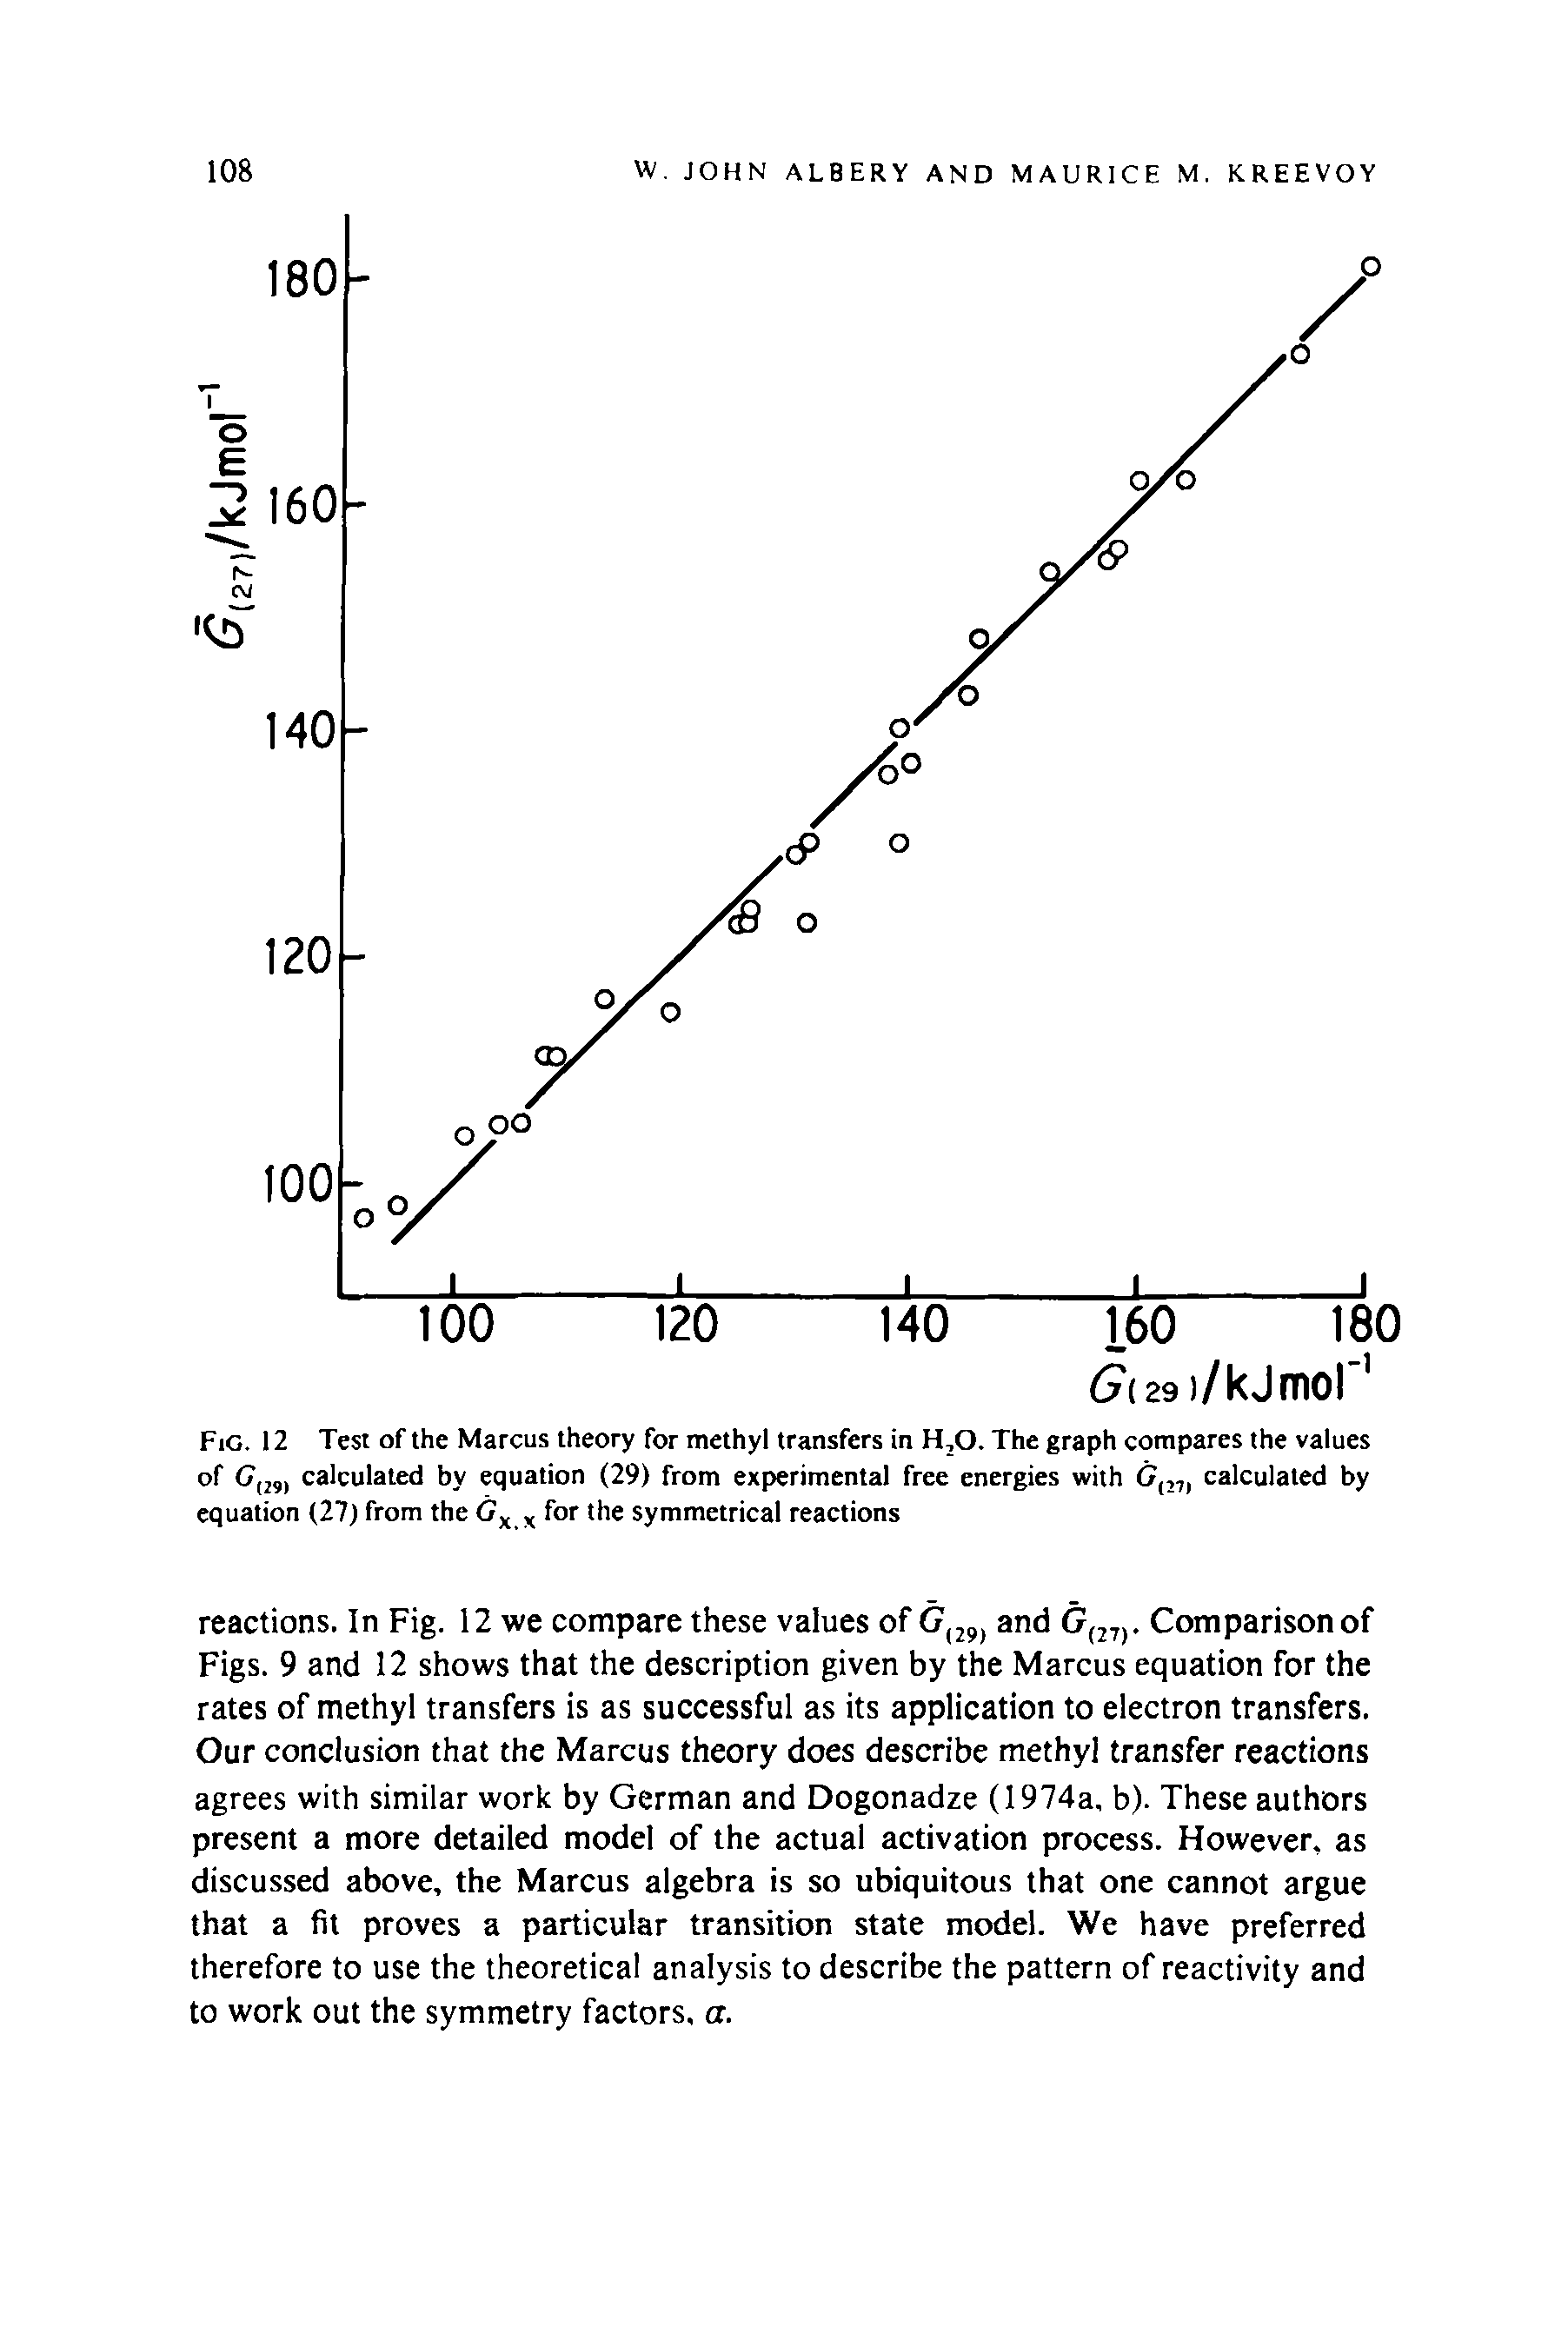 Fig. 12 Test of the Marcus theory for methyl transfers in H,0. The graph compares the values of G(29) calculated by equation (29) from experimental free energies with C,7) calculated by equation (27) from the Cx x for the symmetrical reactions...